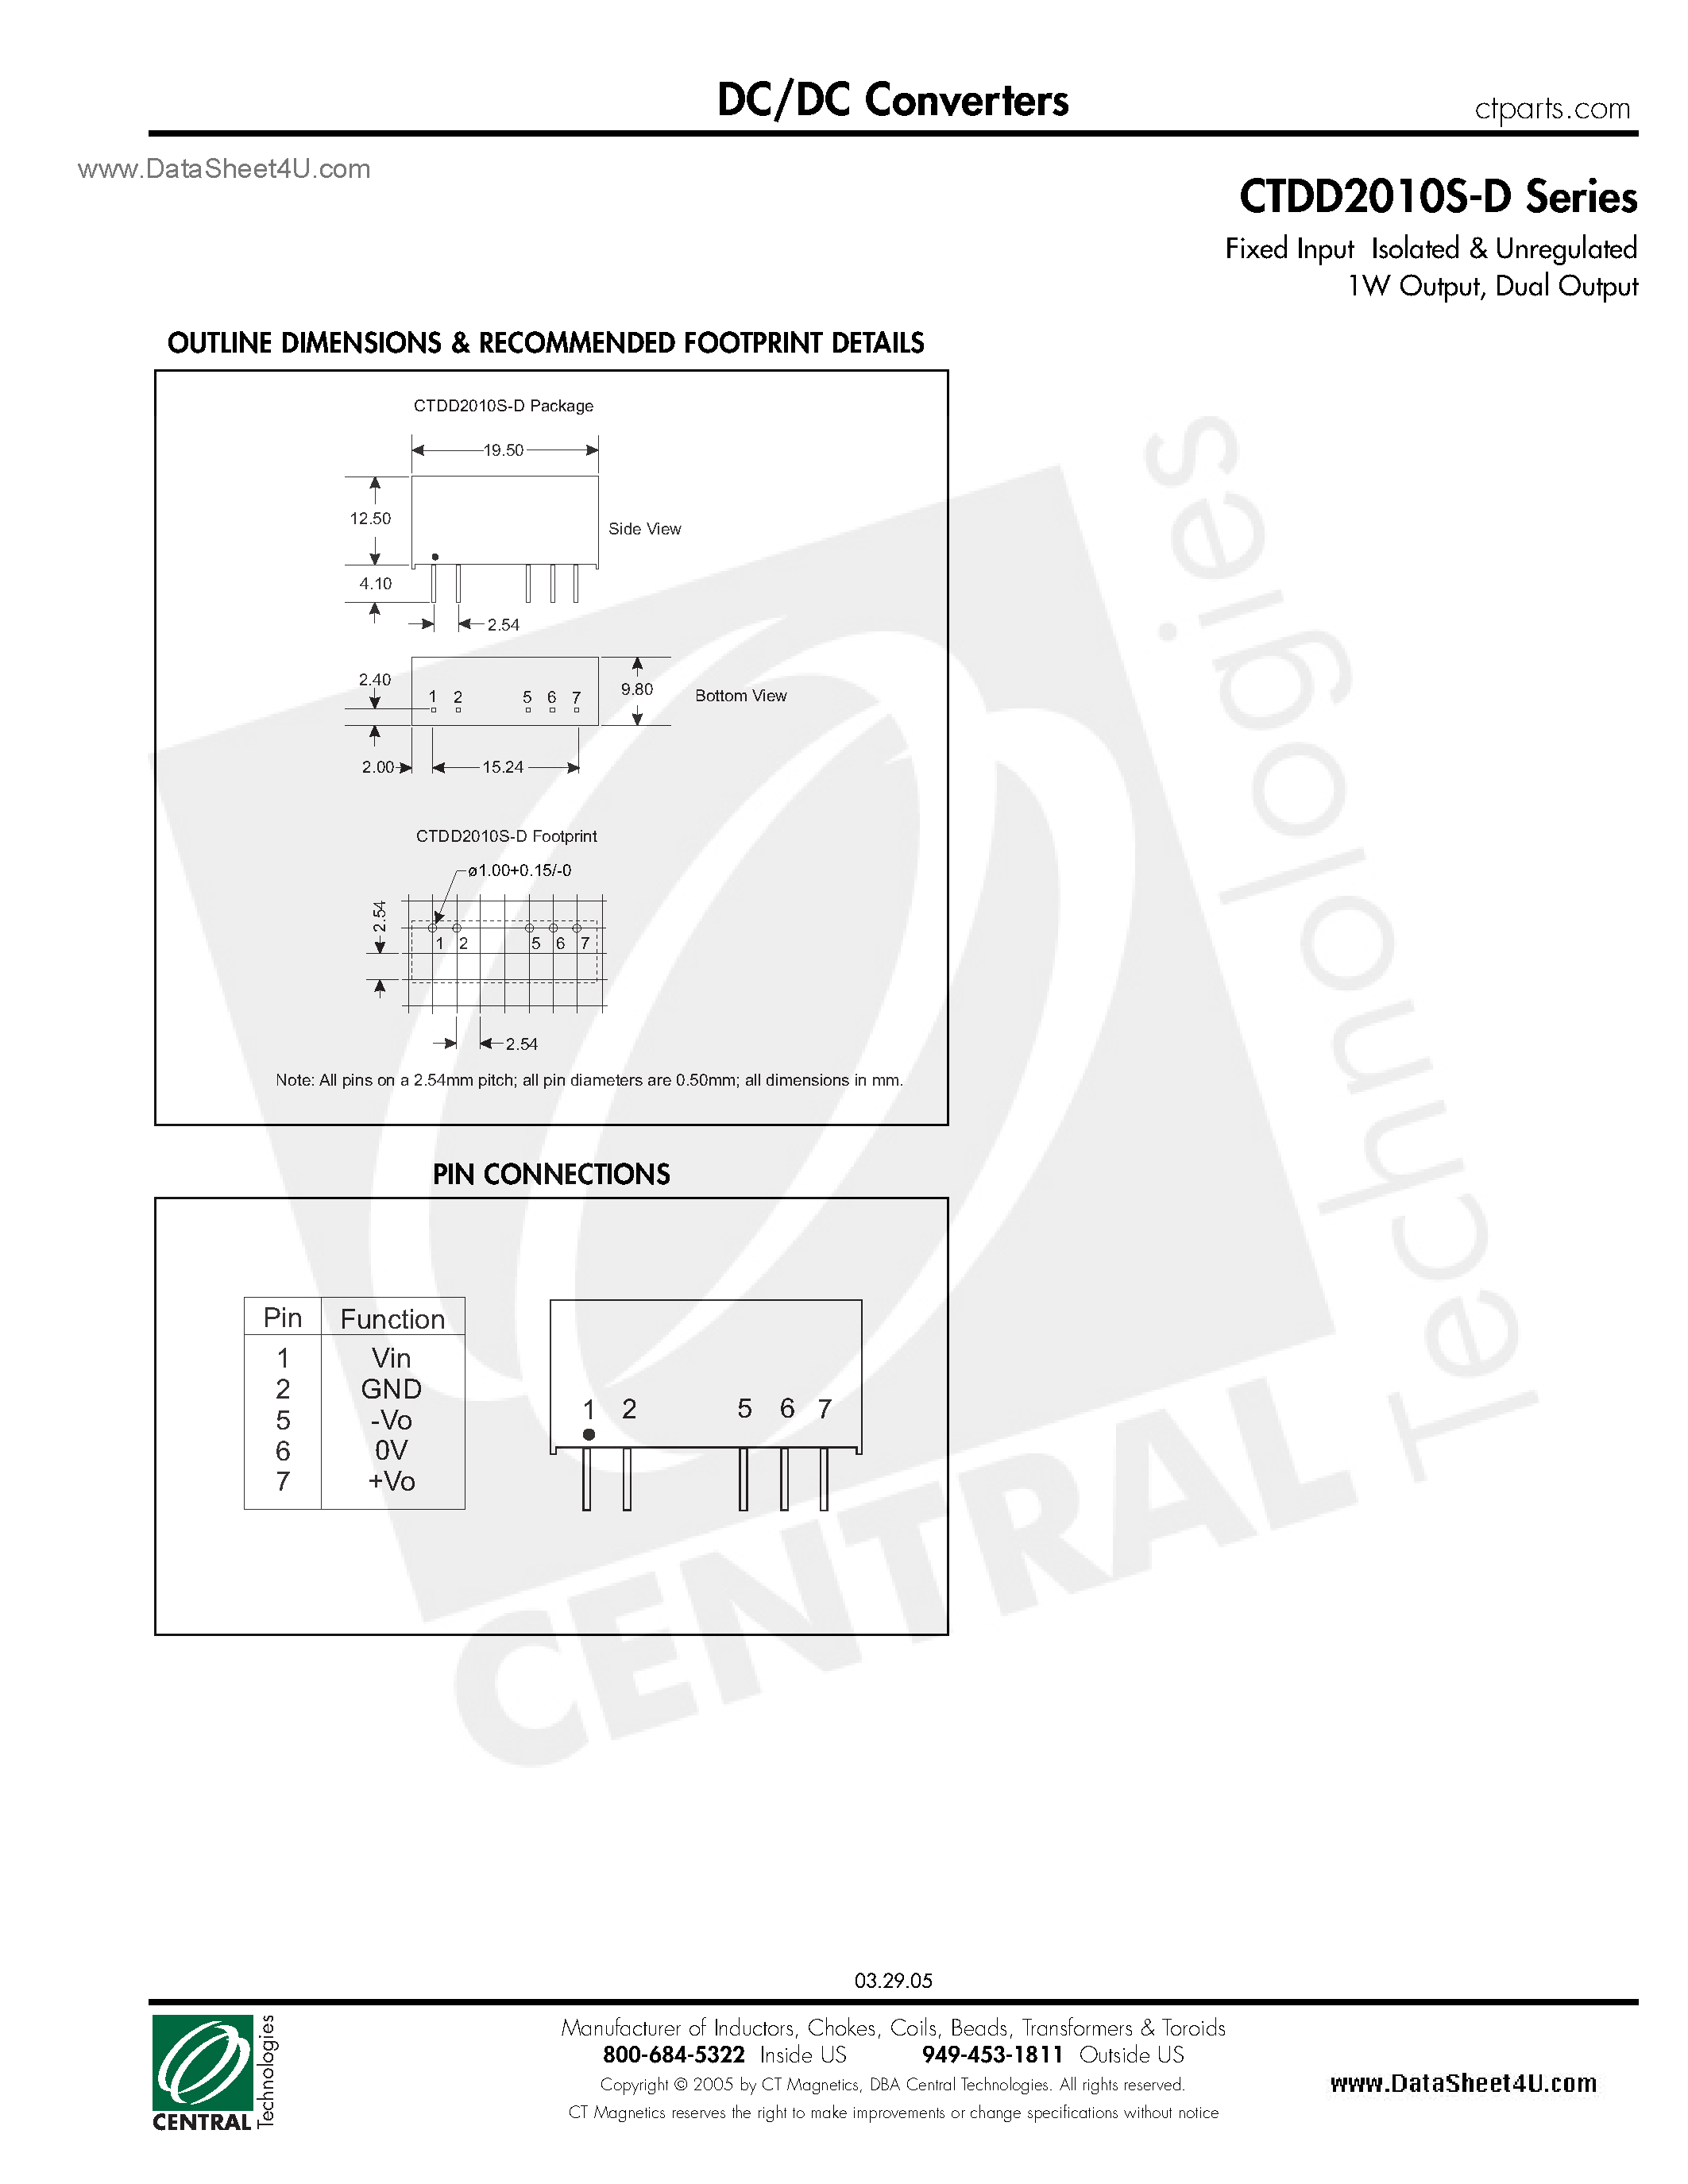 Datasheet CTDD2010S-D - DC/DC Converters page 2